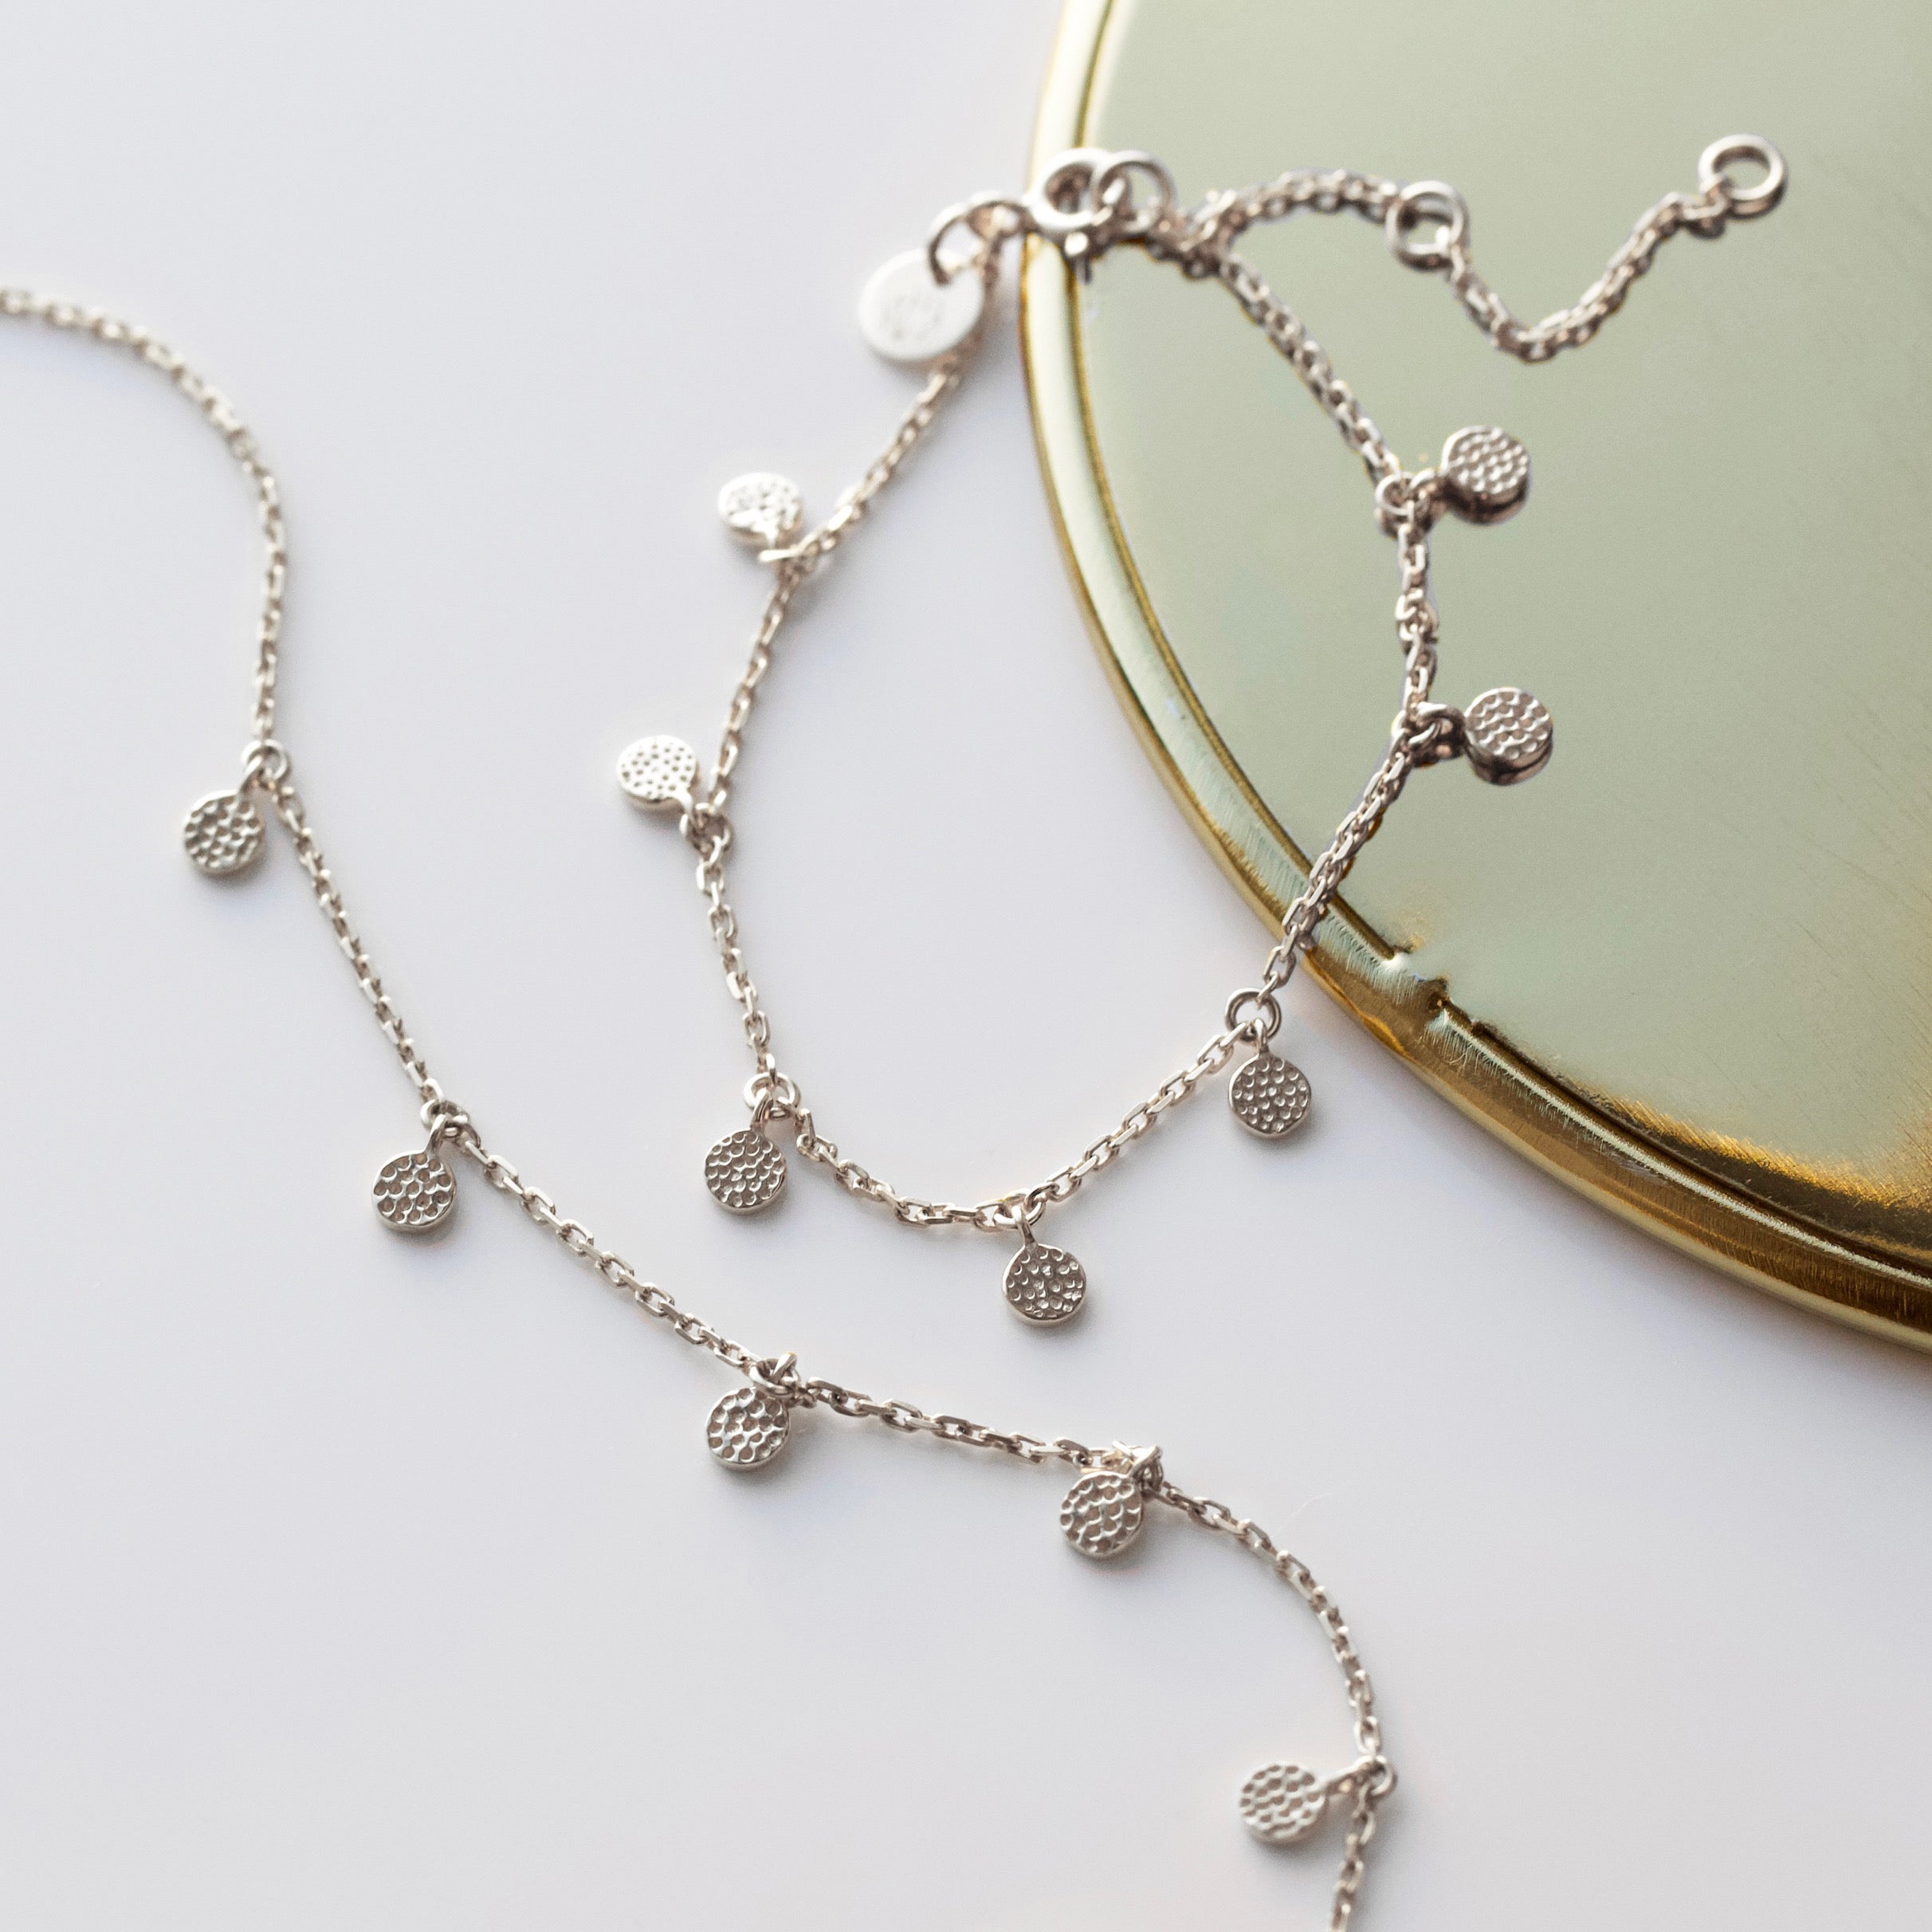 hanging coin necklace and bracelet set in silver